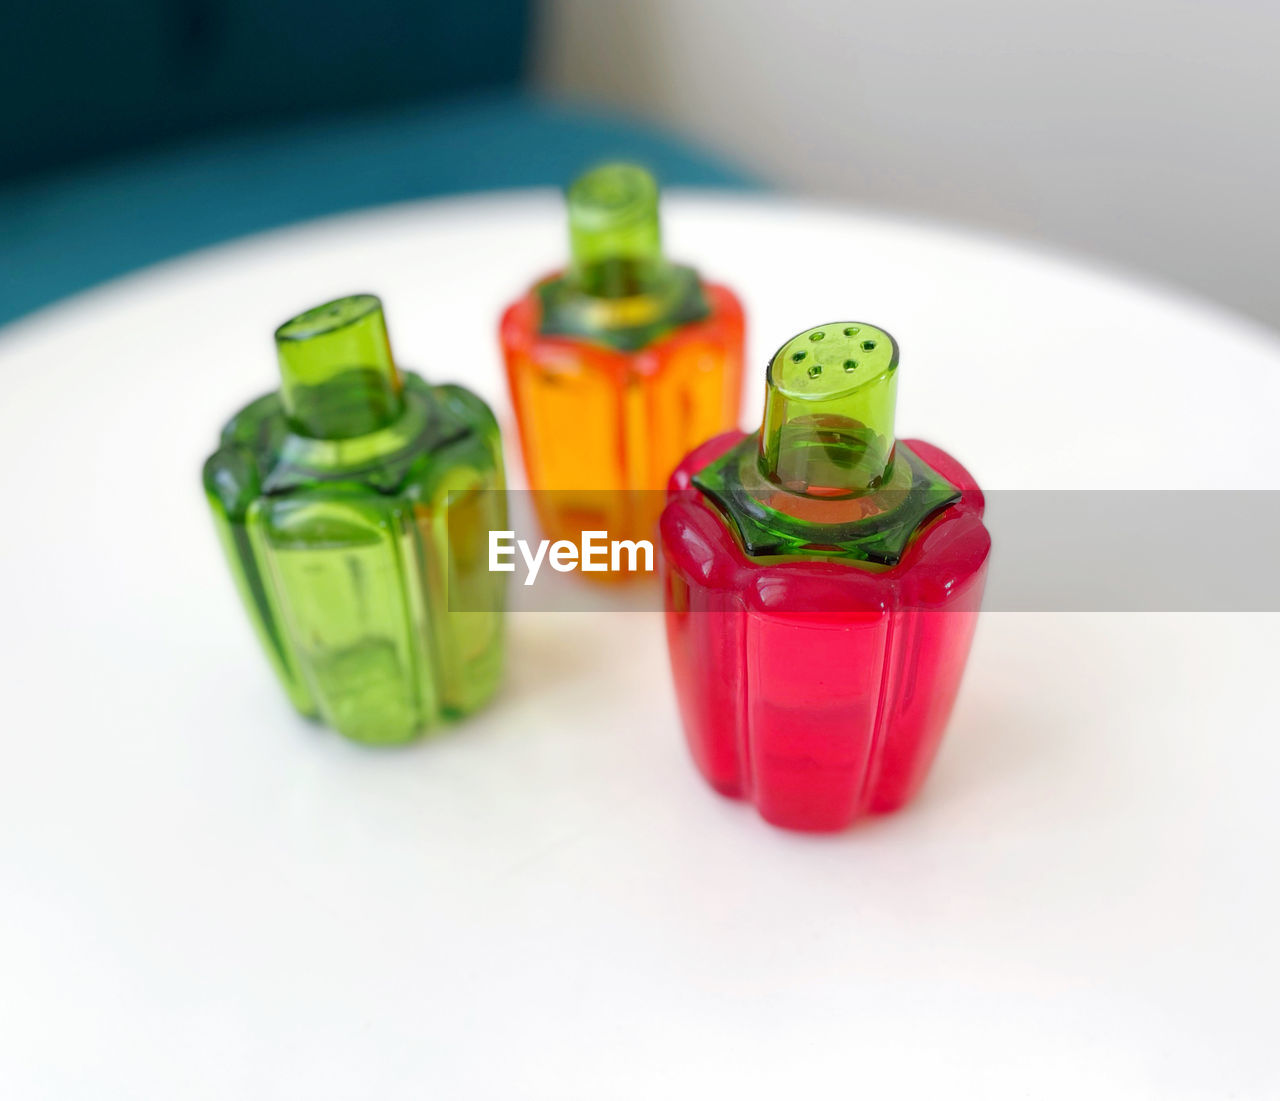 indoors, no people, green, container, multi colored, toy, group of objects, food and drink, red, close-up, bottle, still life, gummi candy